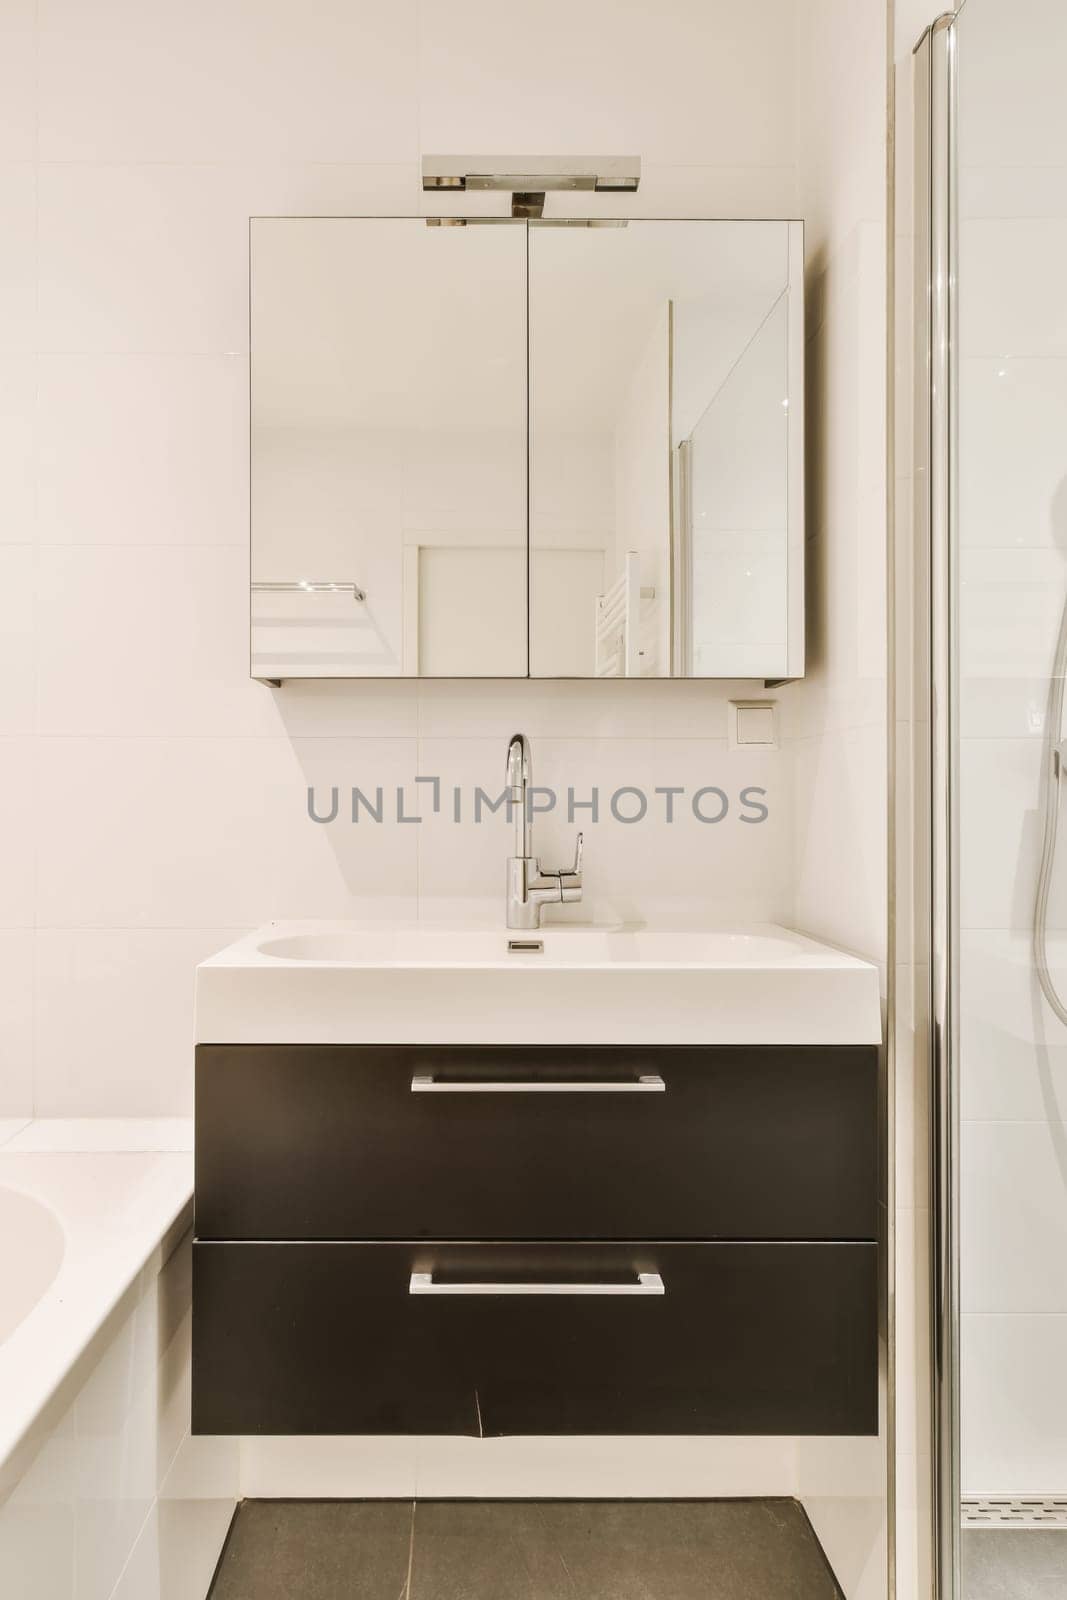 a modern bathroom with black and white fixtures on the vanity, shower stall and toilet in the photo is taken